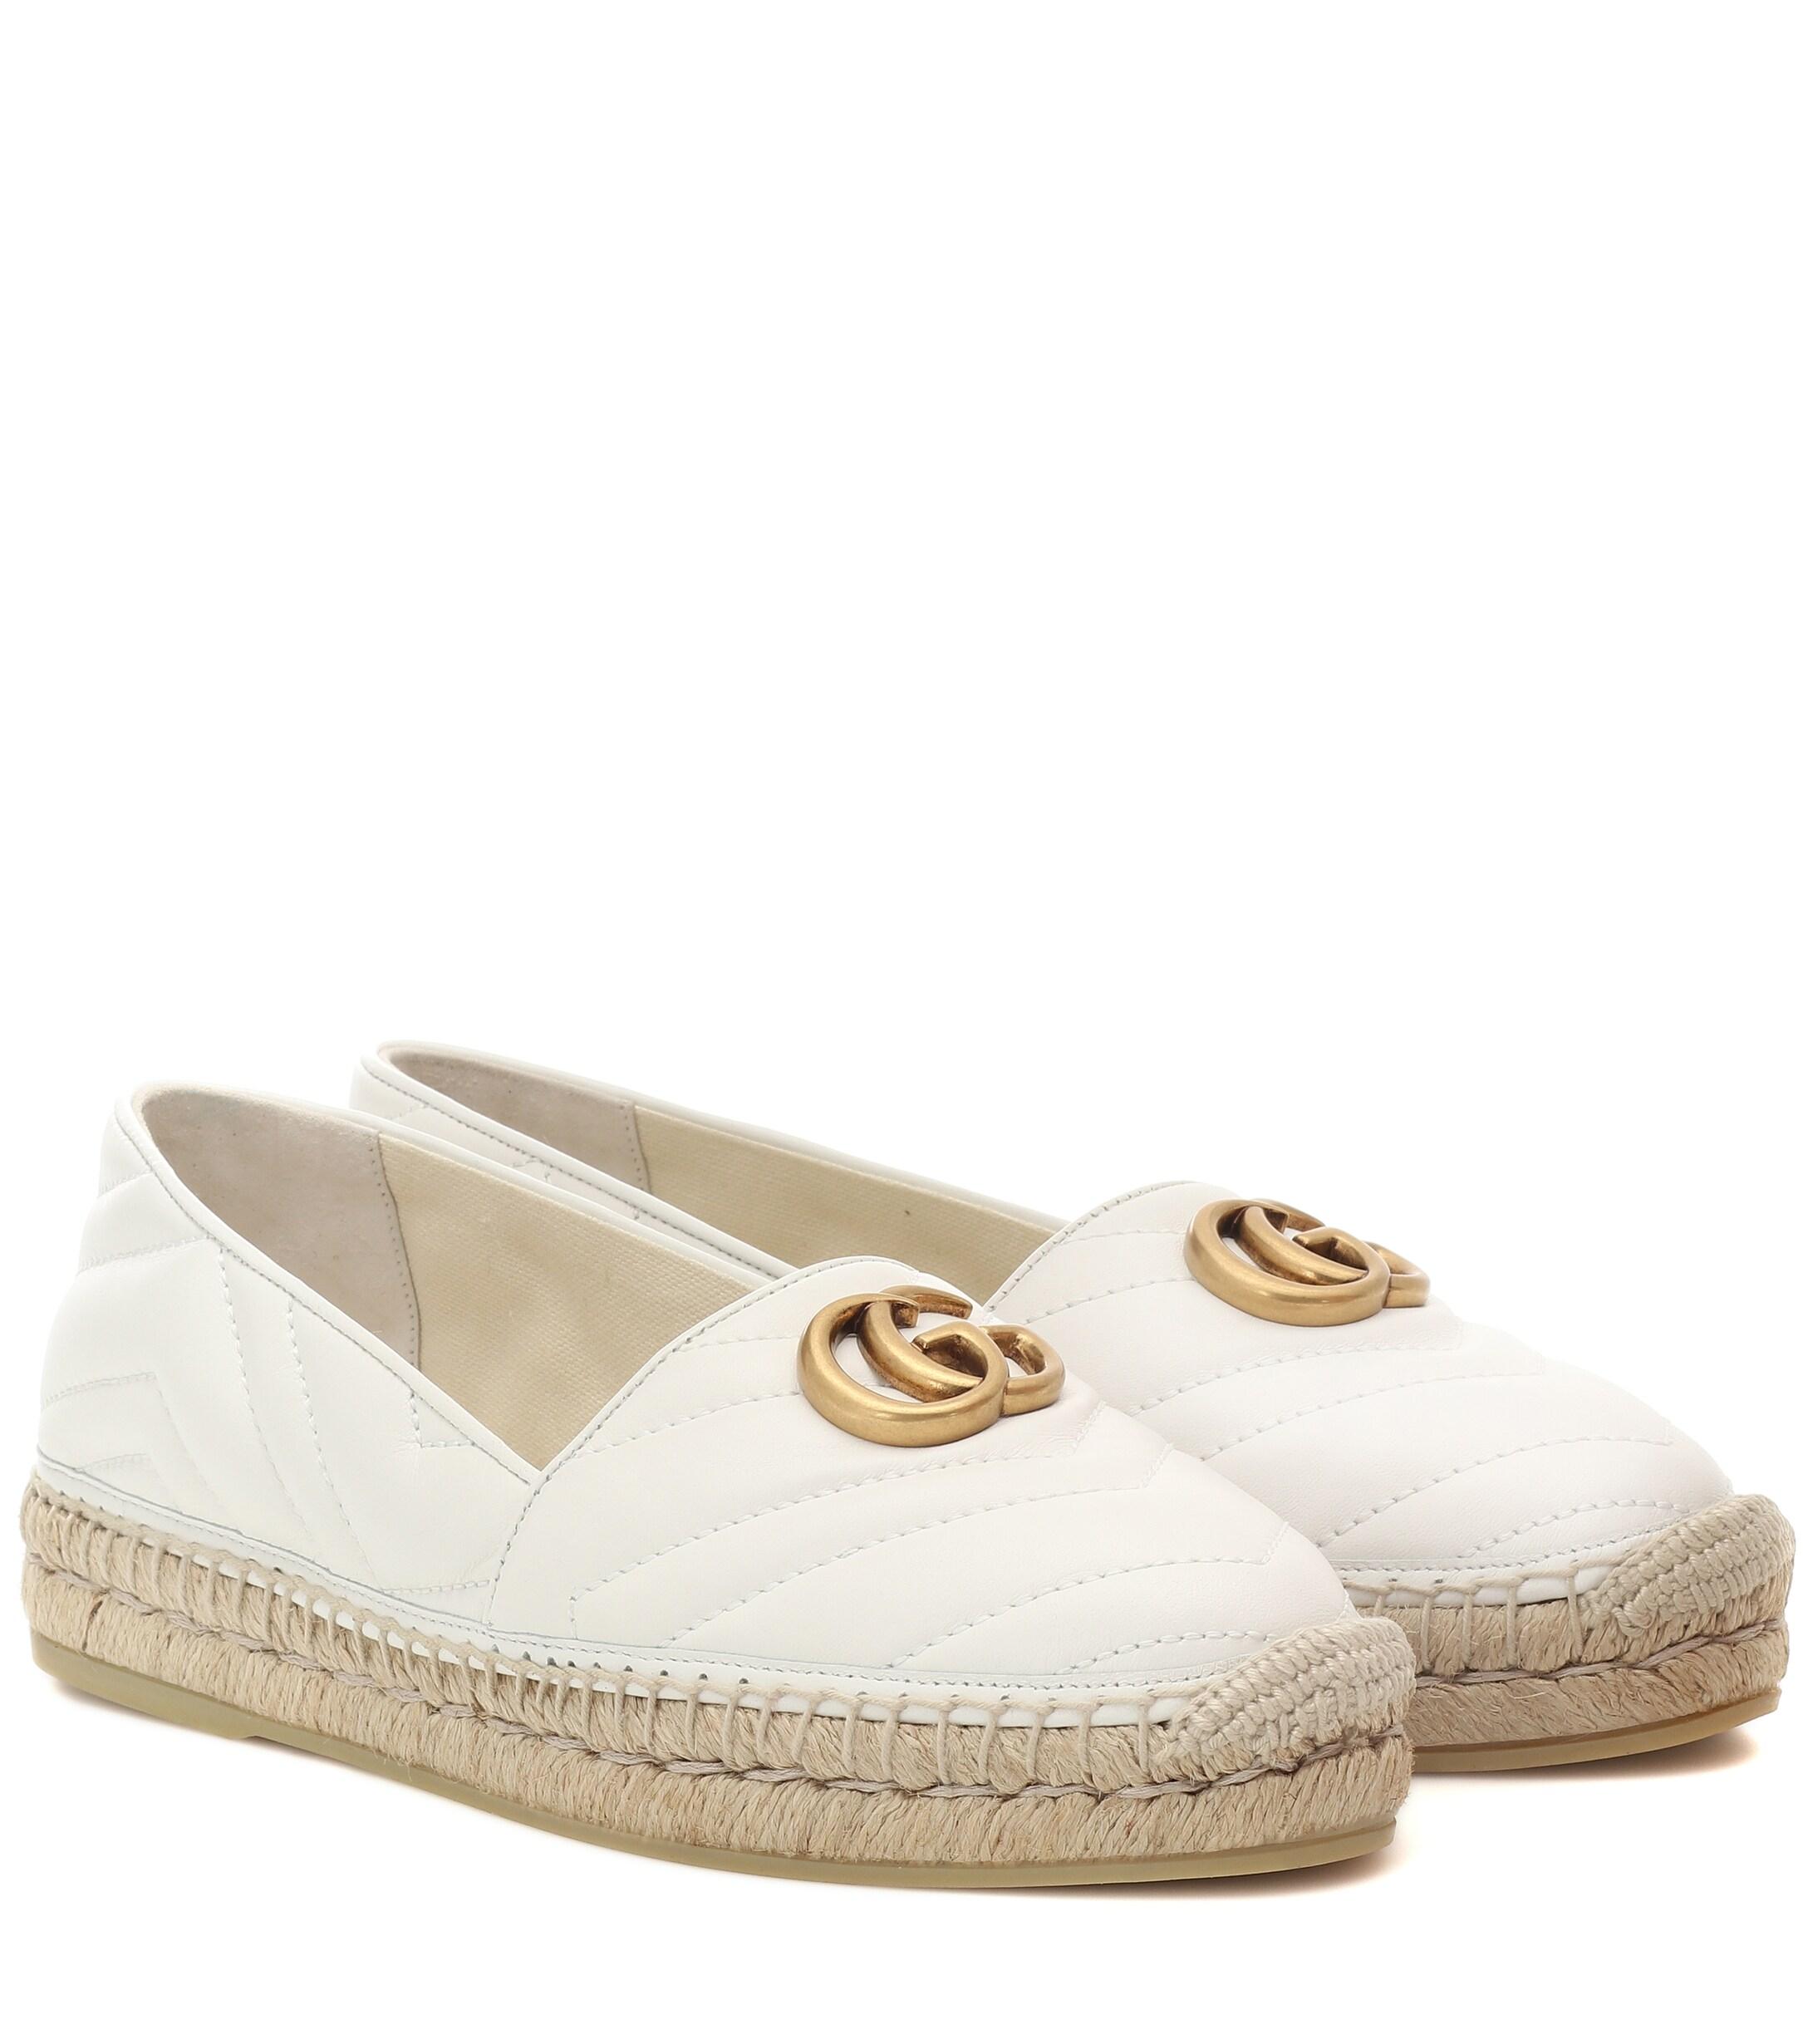 Gucci Pilar Quilted Leather Flatform Espadrilles in White | Lyst